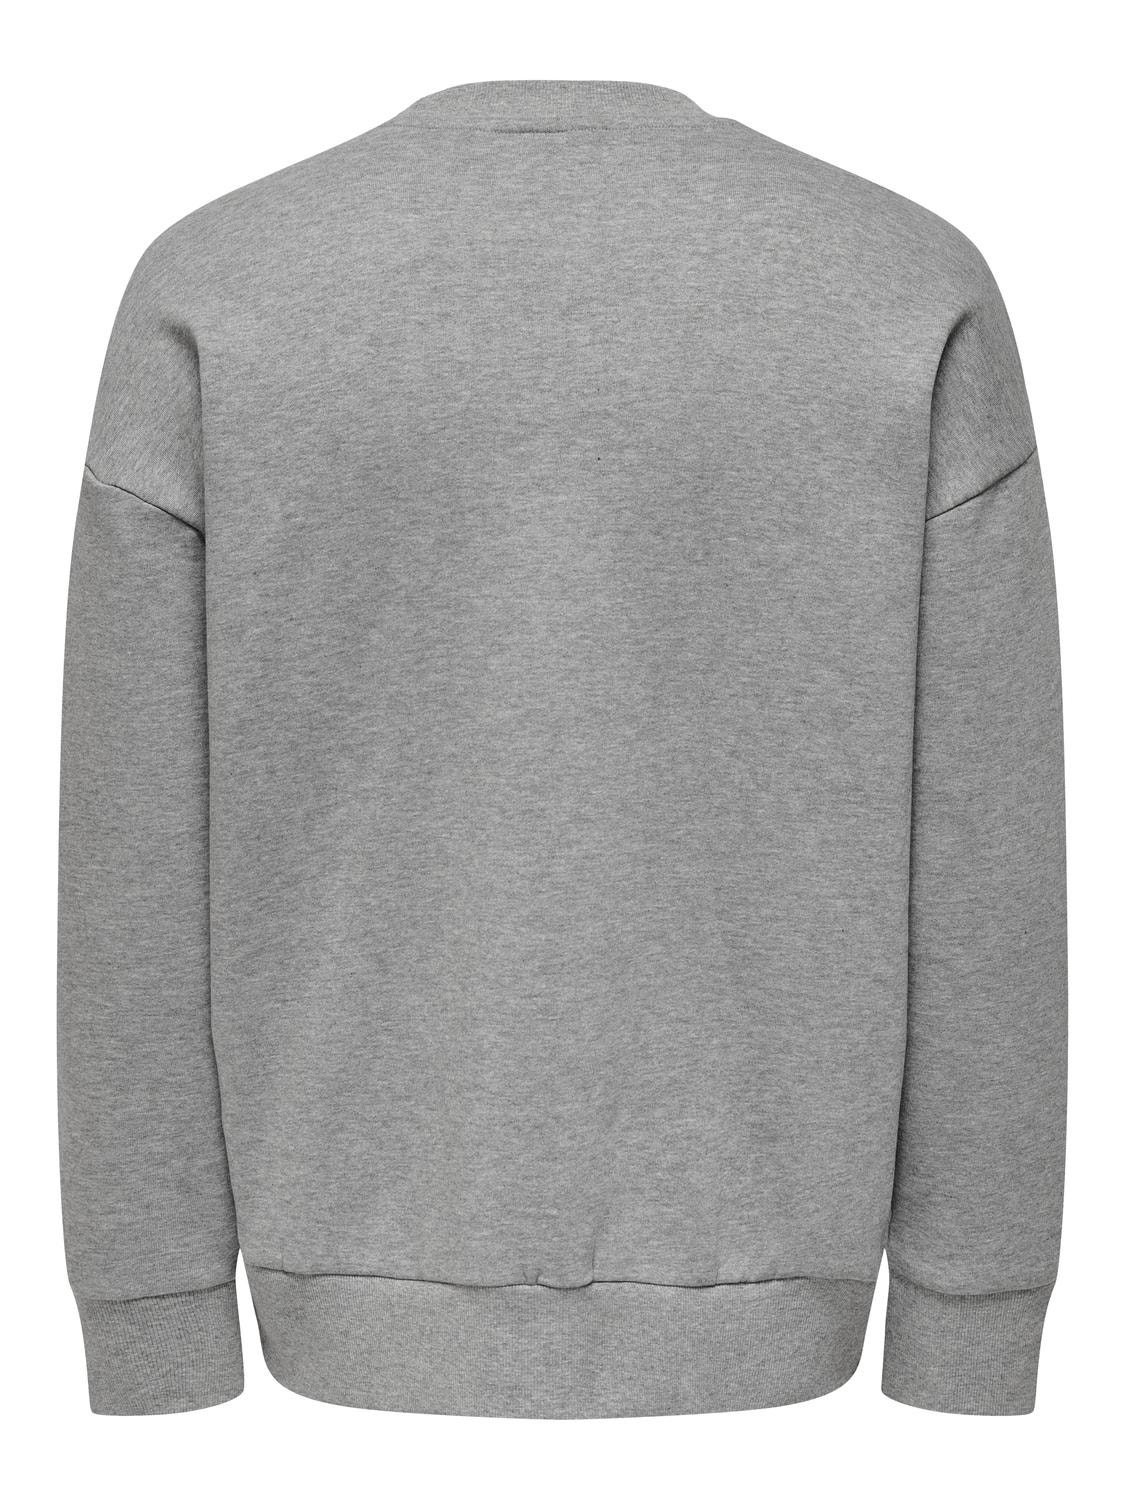 ONLY & SONS Relaxed Fit Hoodie Sweatshirt -Light Grey Melange - 22026662